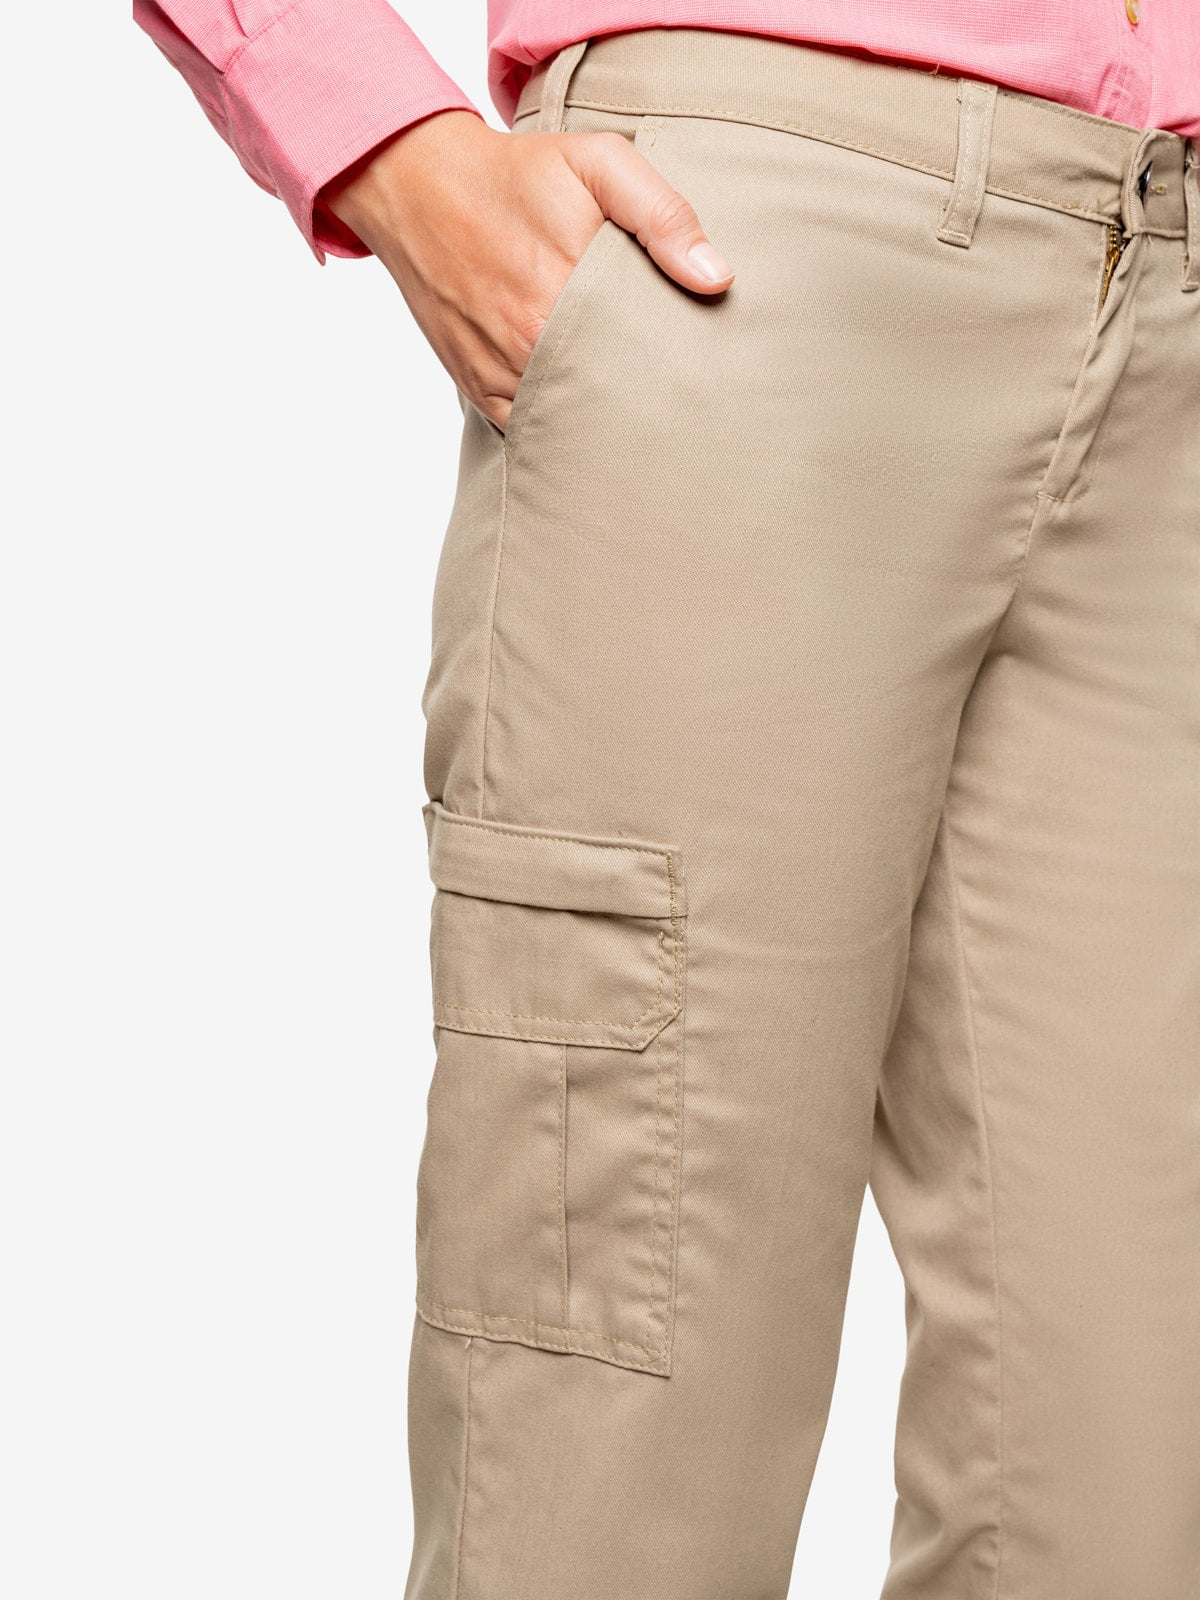 Women's Insect Repellent Cargo Pants  Best-Selling Pants for Women –  Insect Shield